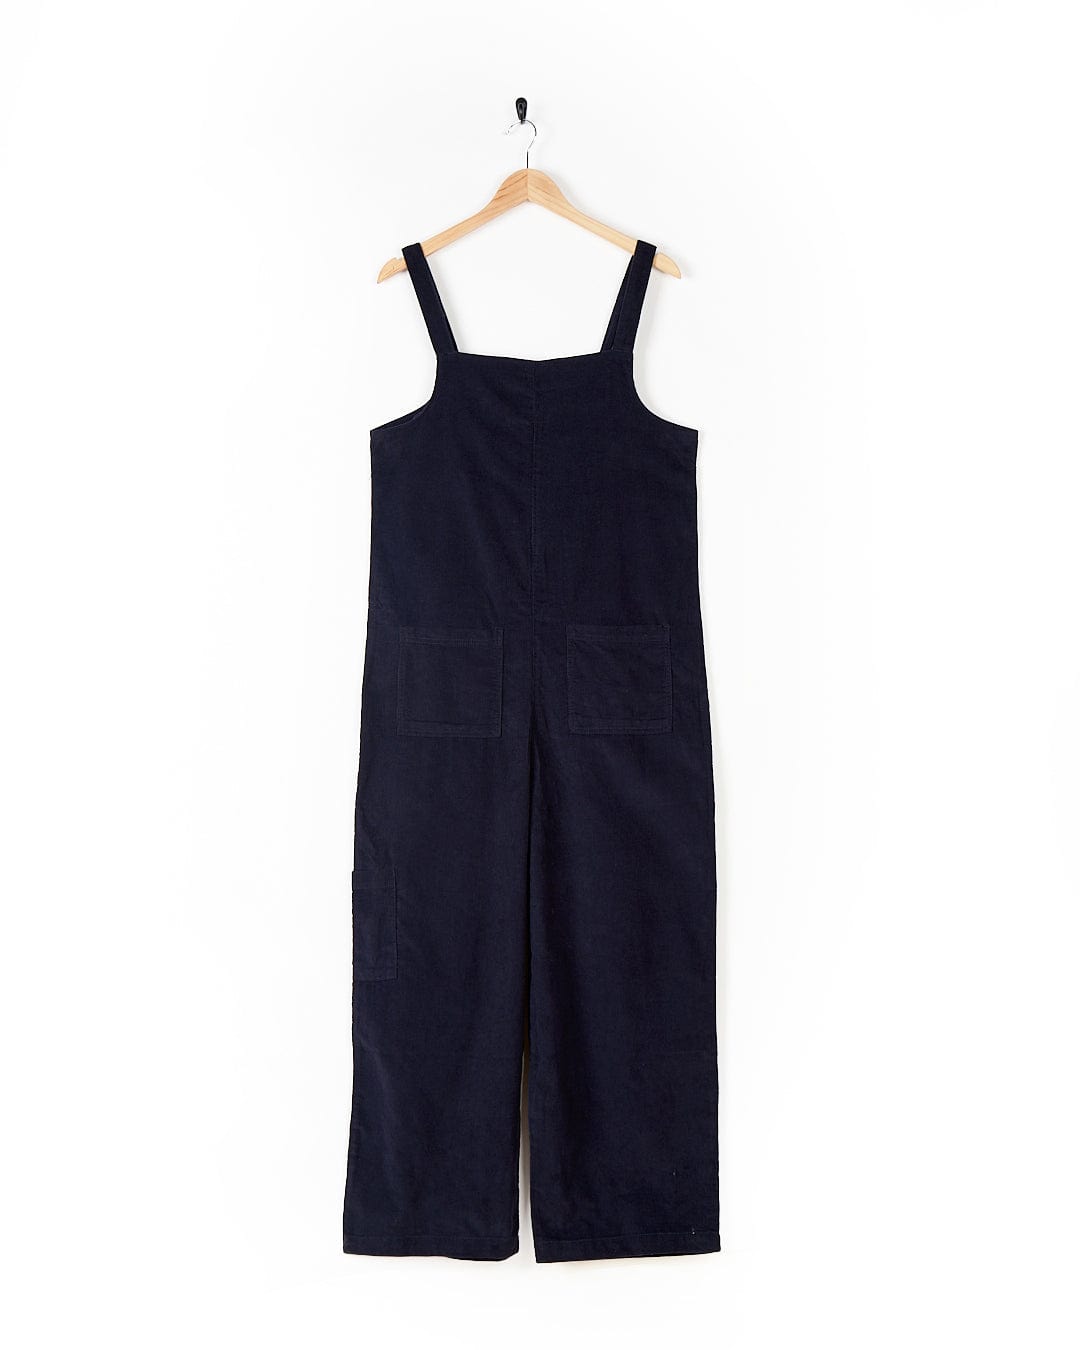 A Nancy - Womens Cord Jumpsuit - Dark Blue from Saltrock displayed on a wooden hanger against a white background, perfect for the fashion-conscious woman.